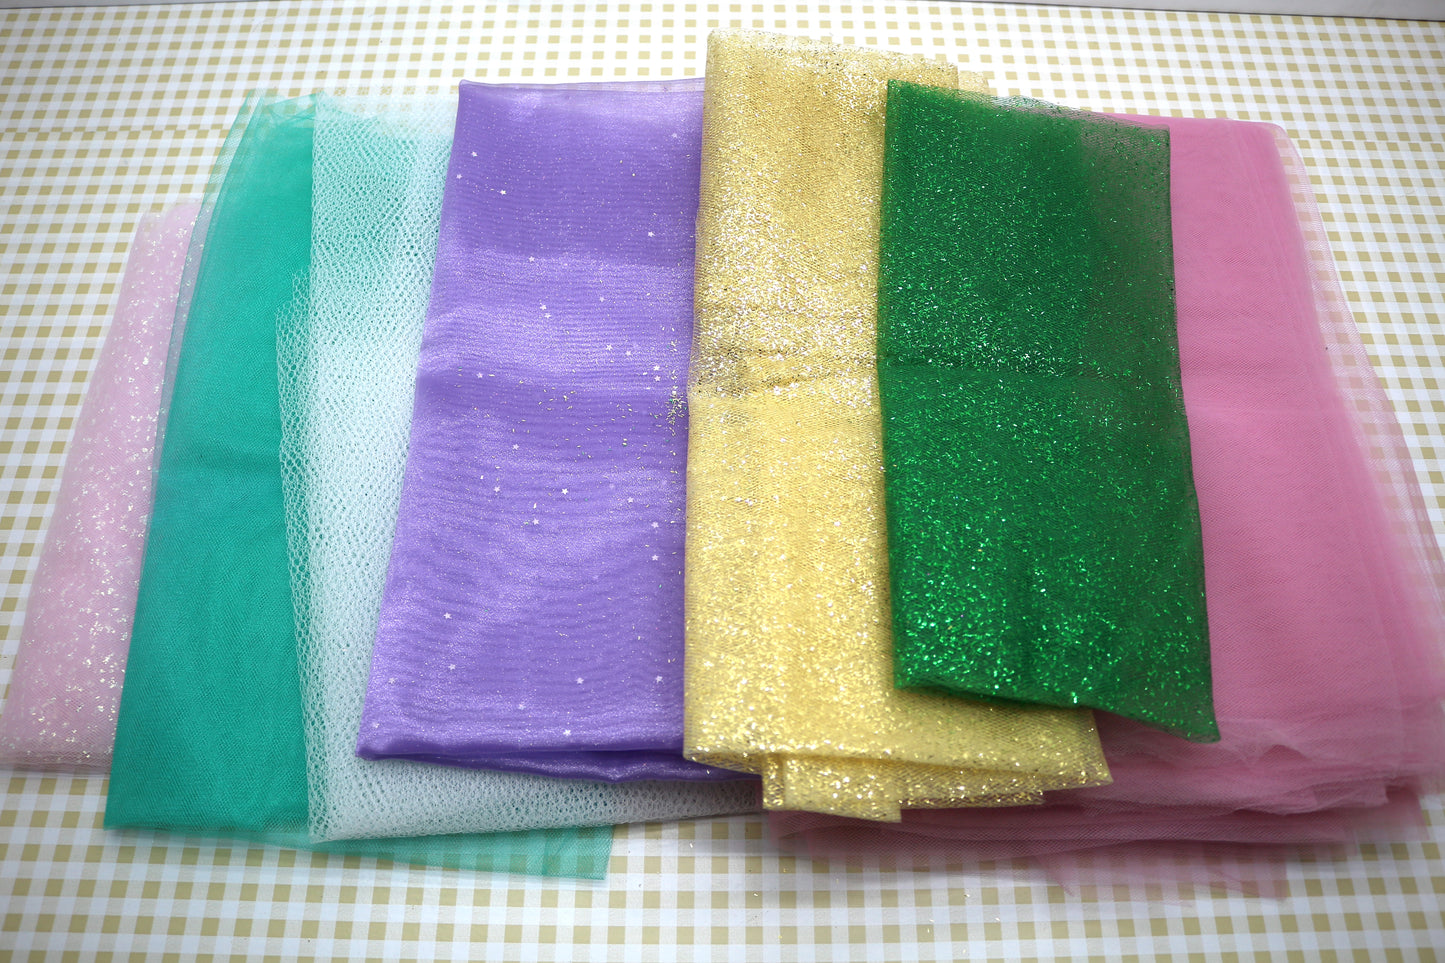 1/2 pound Variety of Tulle Fabric, Tulle Gift Wrap, Gift Embellishment, Craft Supplies